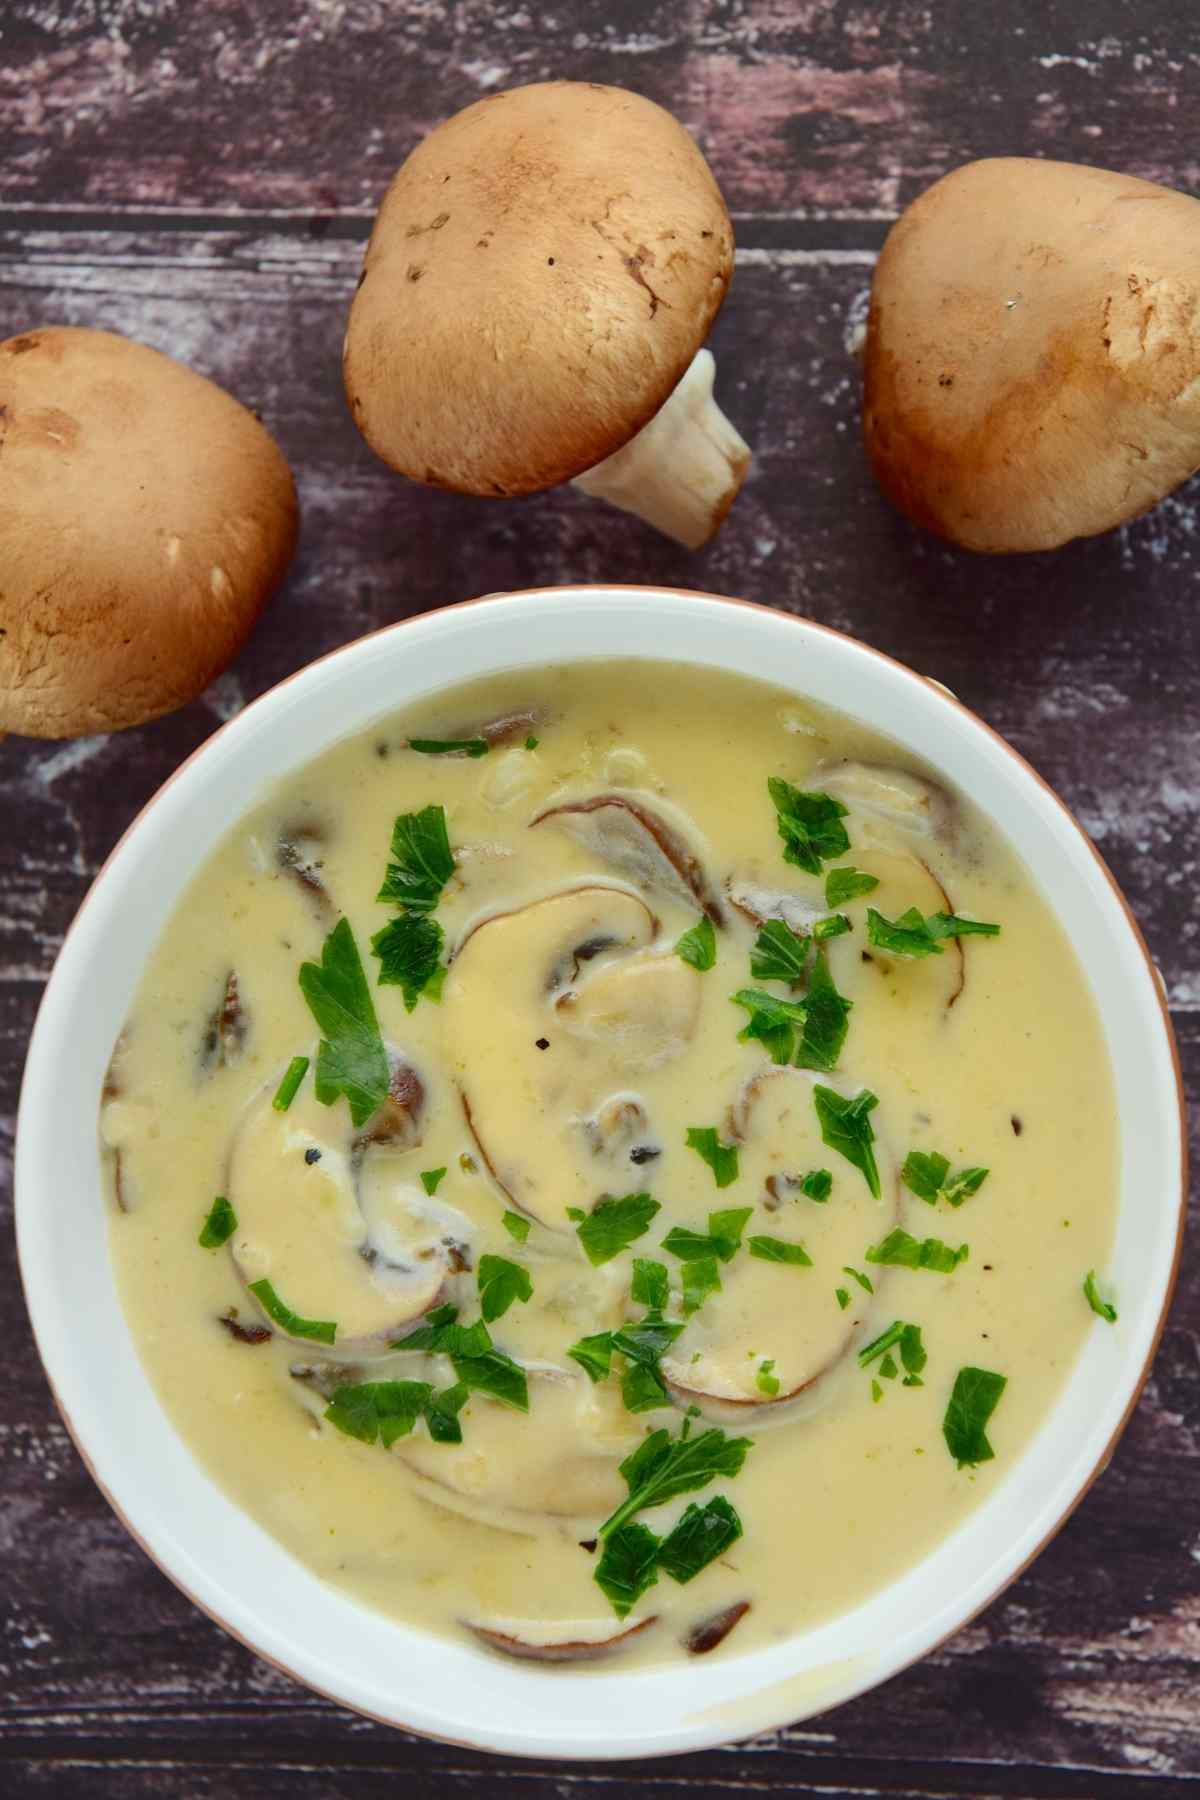 This Mushroom Cream Sauce is so versatile! It’s made using simple ingredients you likely have on hand and has a rich, creamy, and savory flavor.